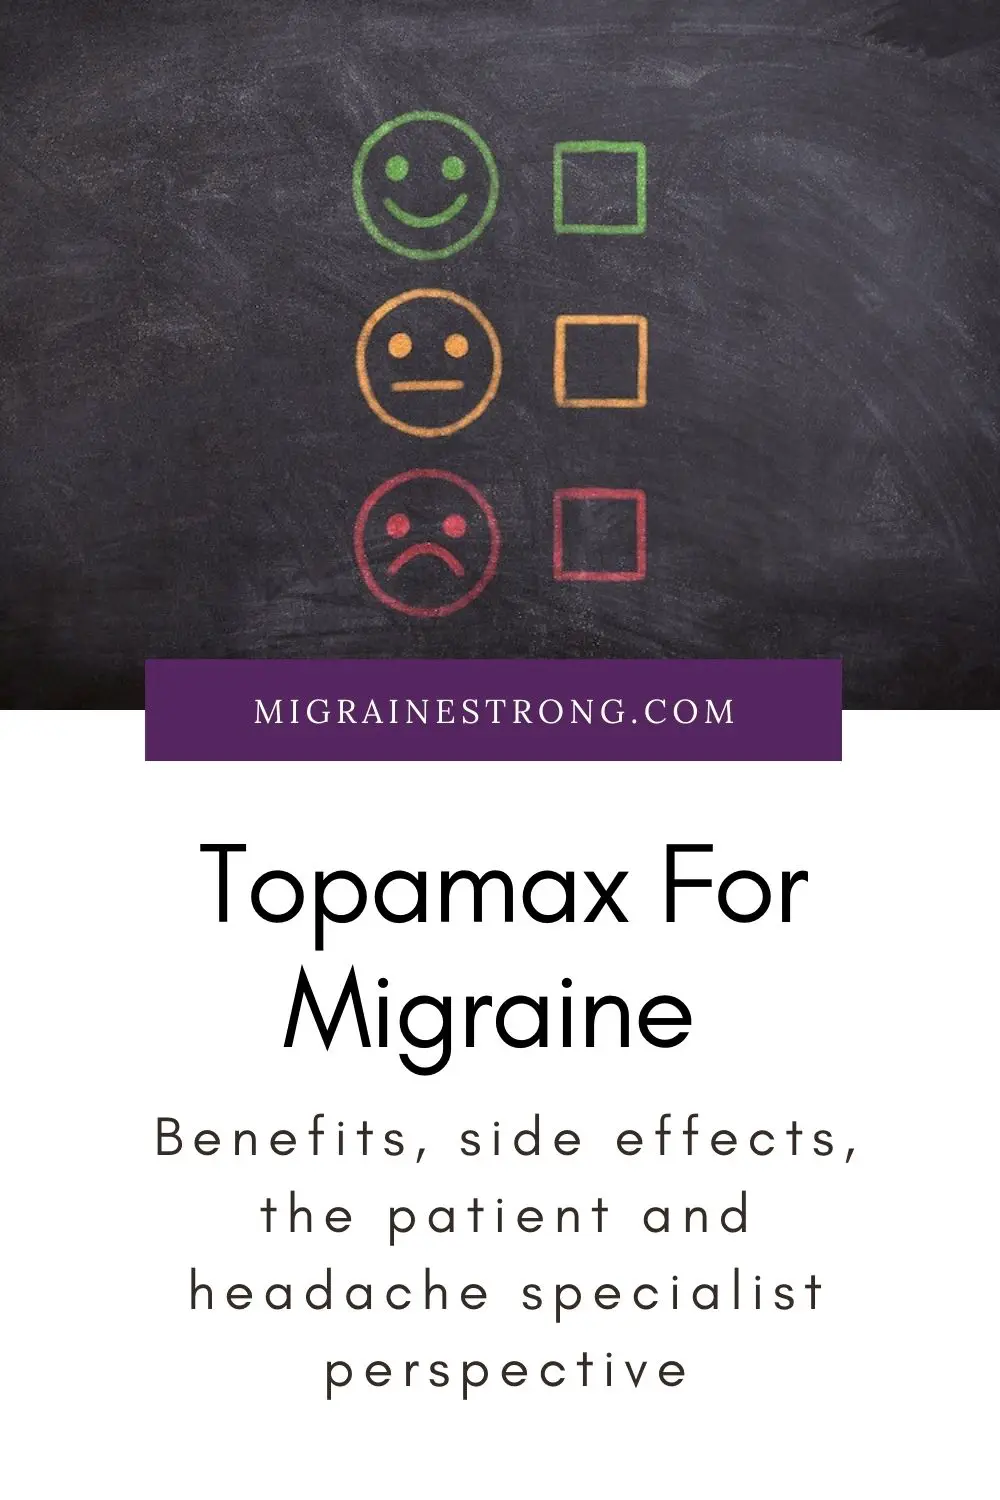 Topamax For Migraine - Reviews and Facts You Should Know